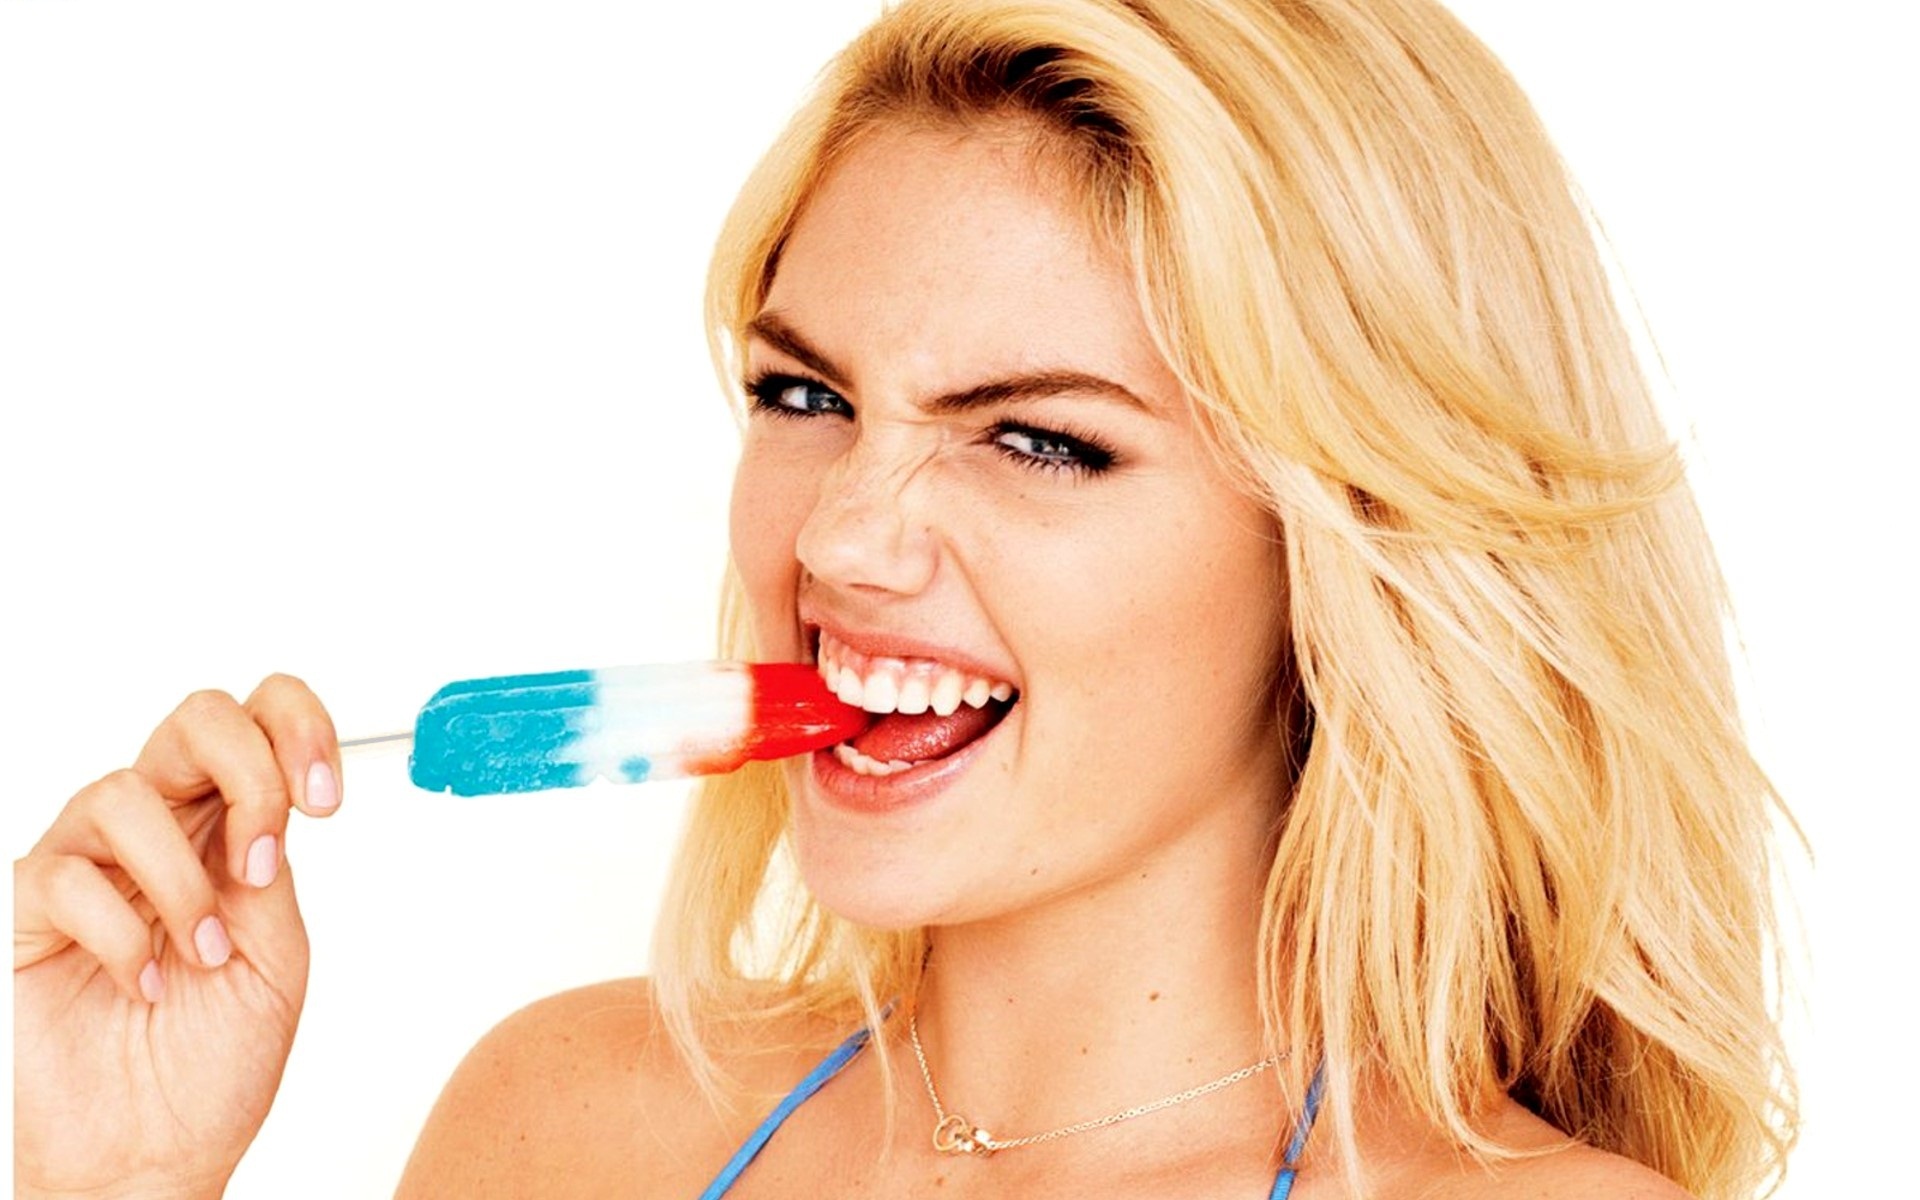 Kate Upton Wallpaper Pictures Image